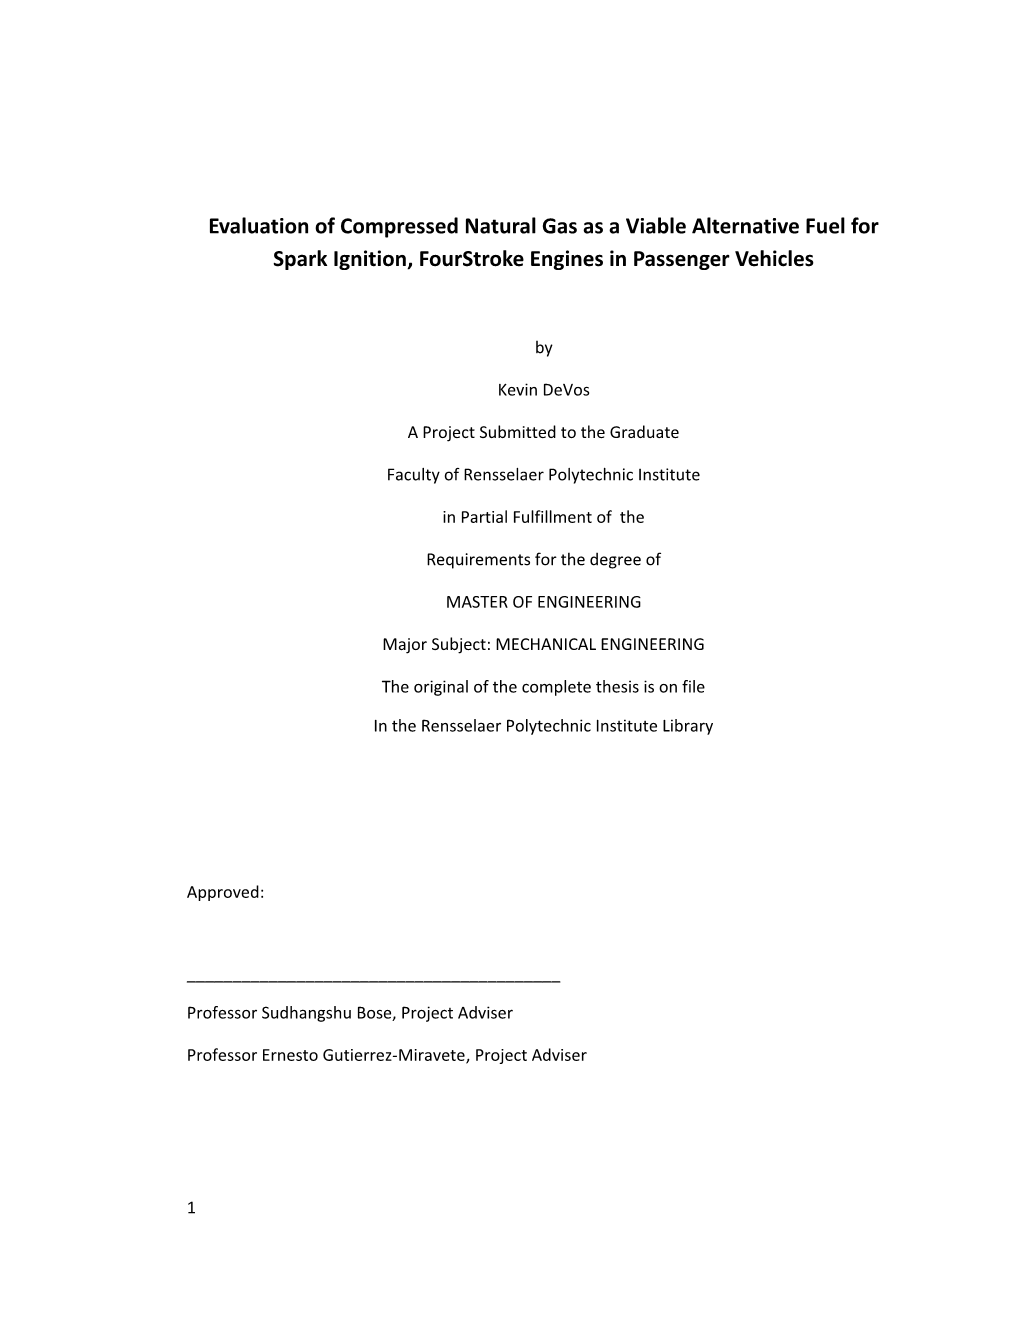 Evaluation of Compressed Natural Gas As a Viable Alternative Fuel for Spark Ignition